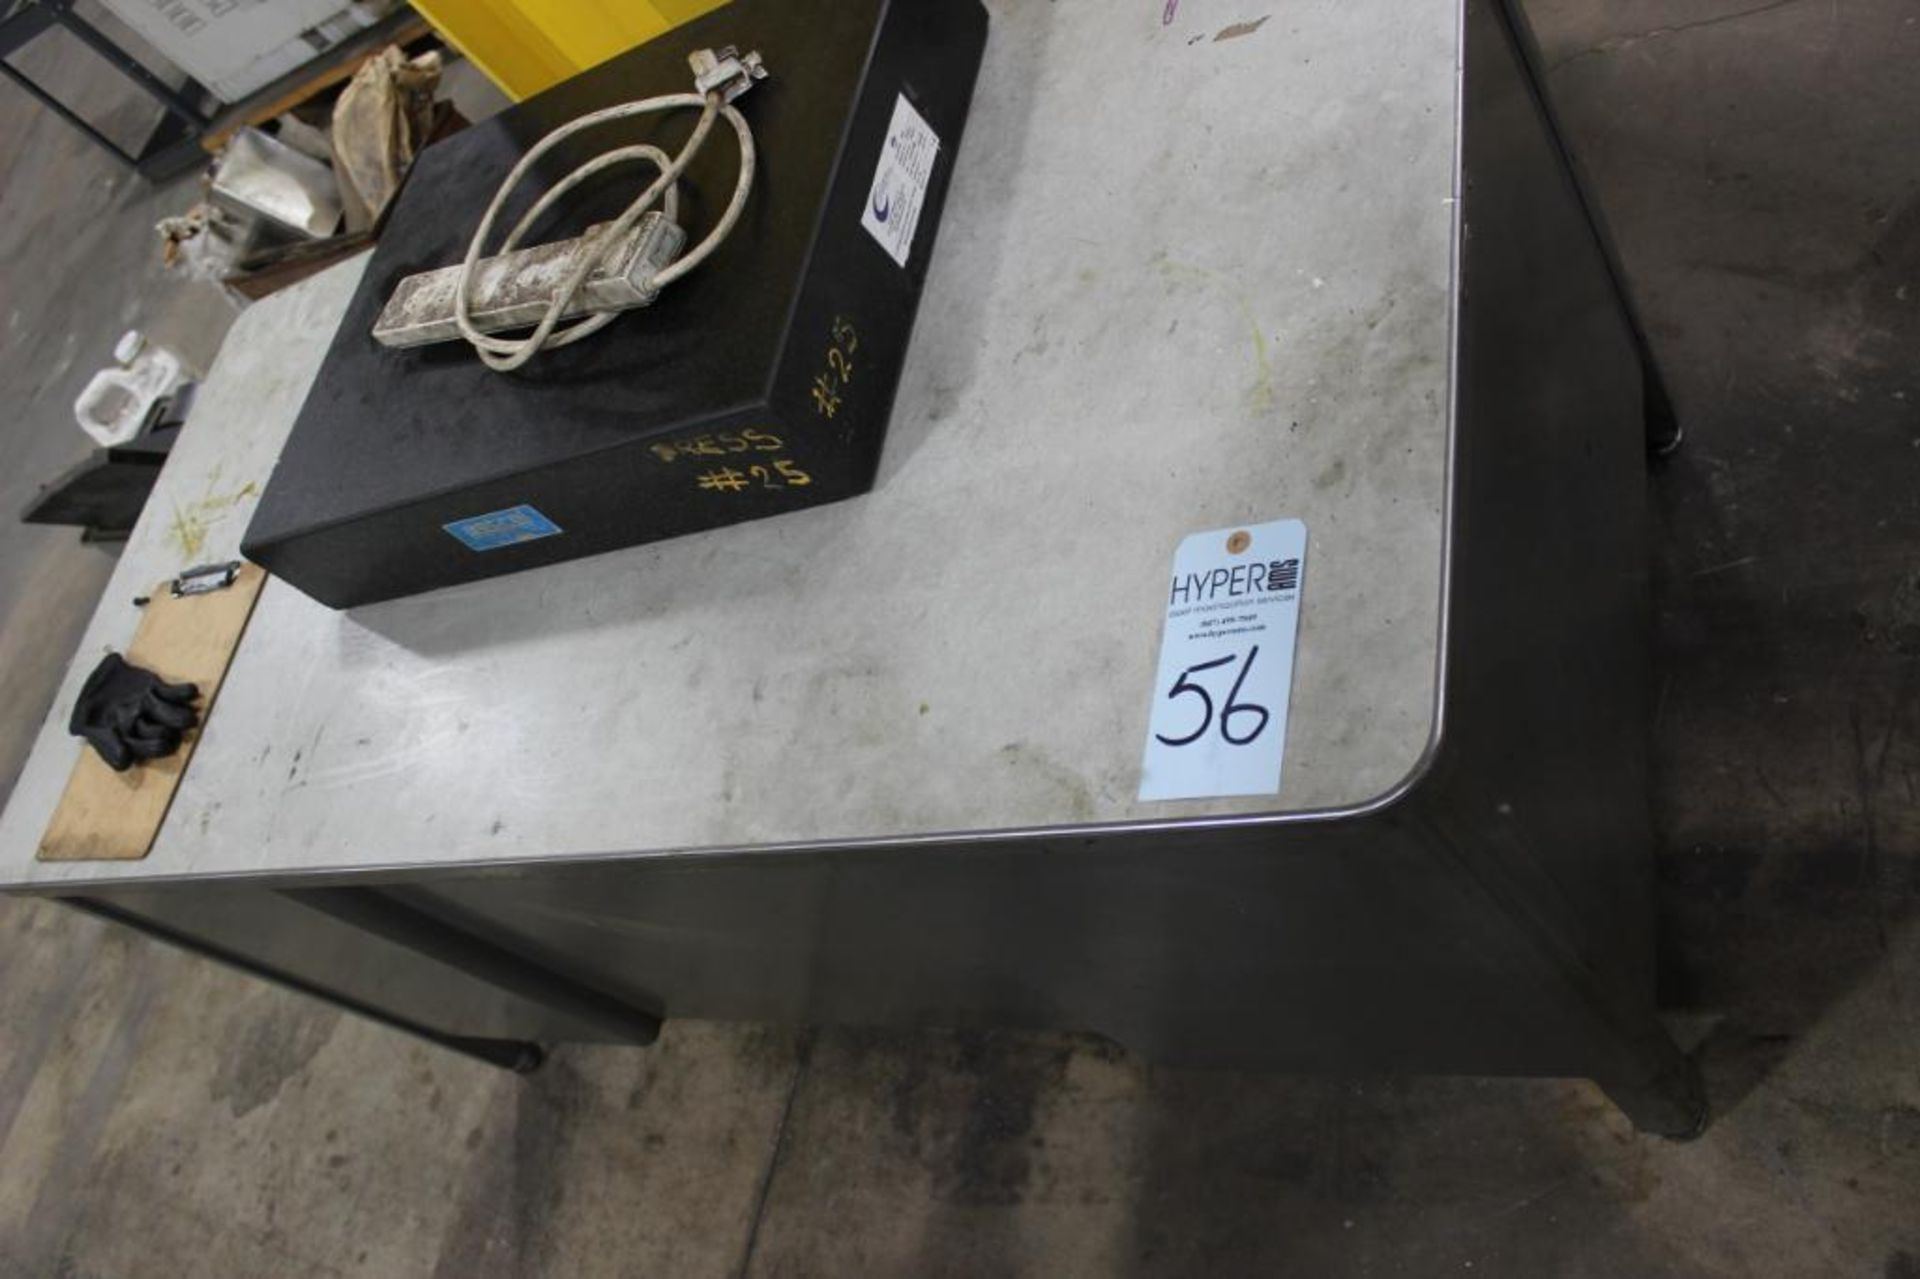 Lot c/o: (1)- Steel Desk w/ (1)-24" x 18" Astral Granite Surface Plate